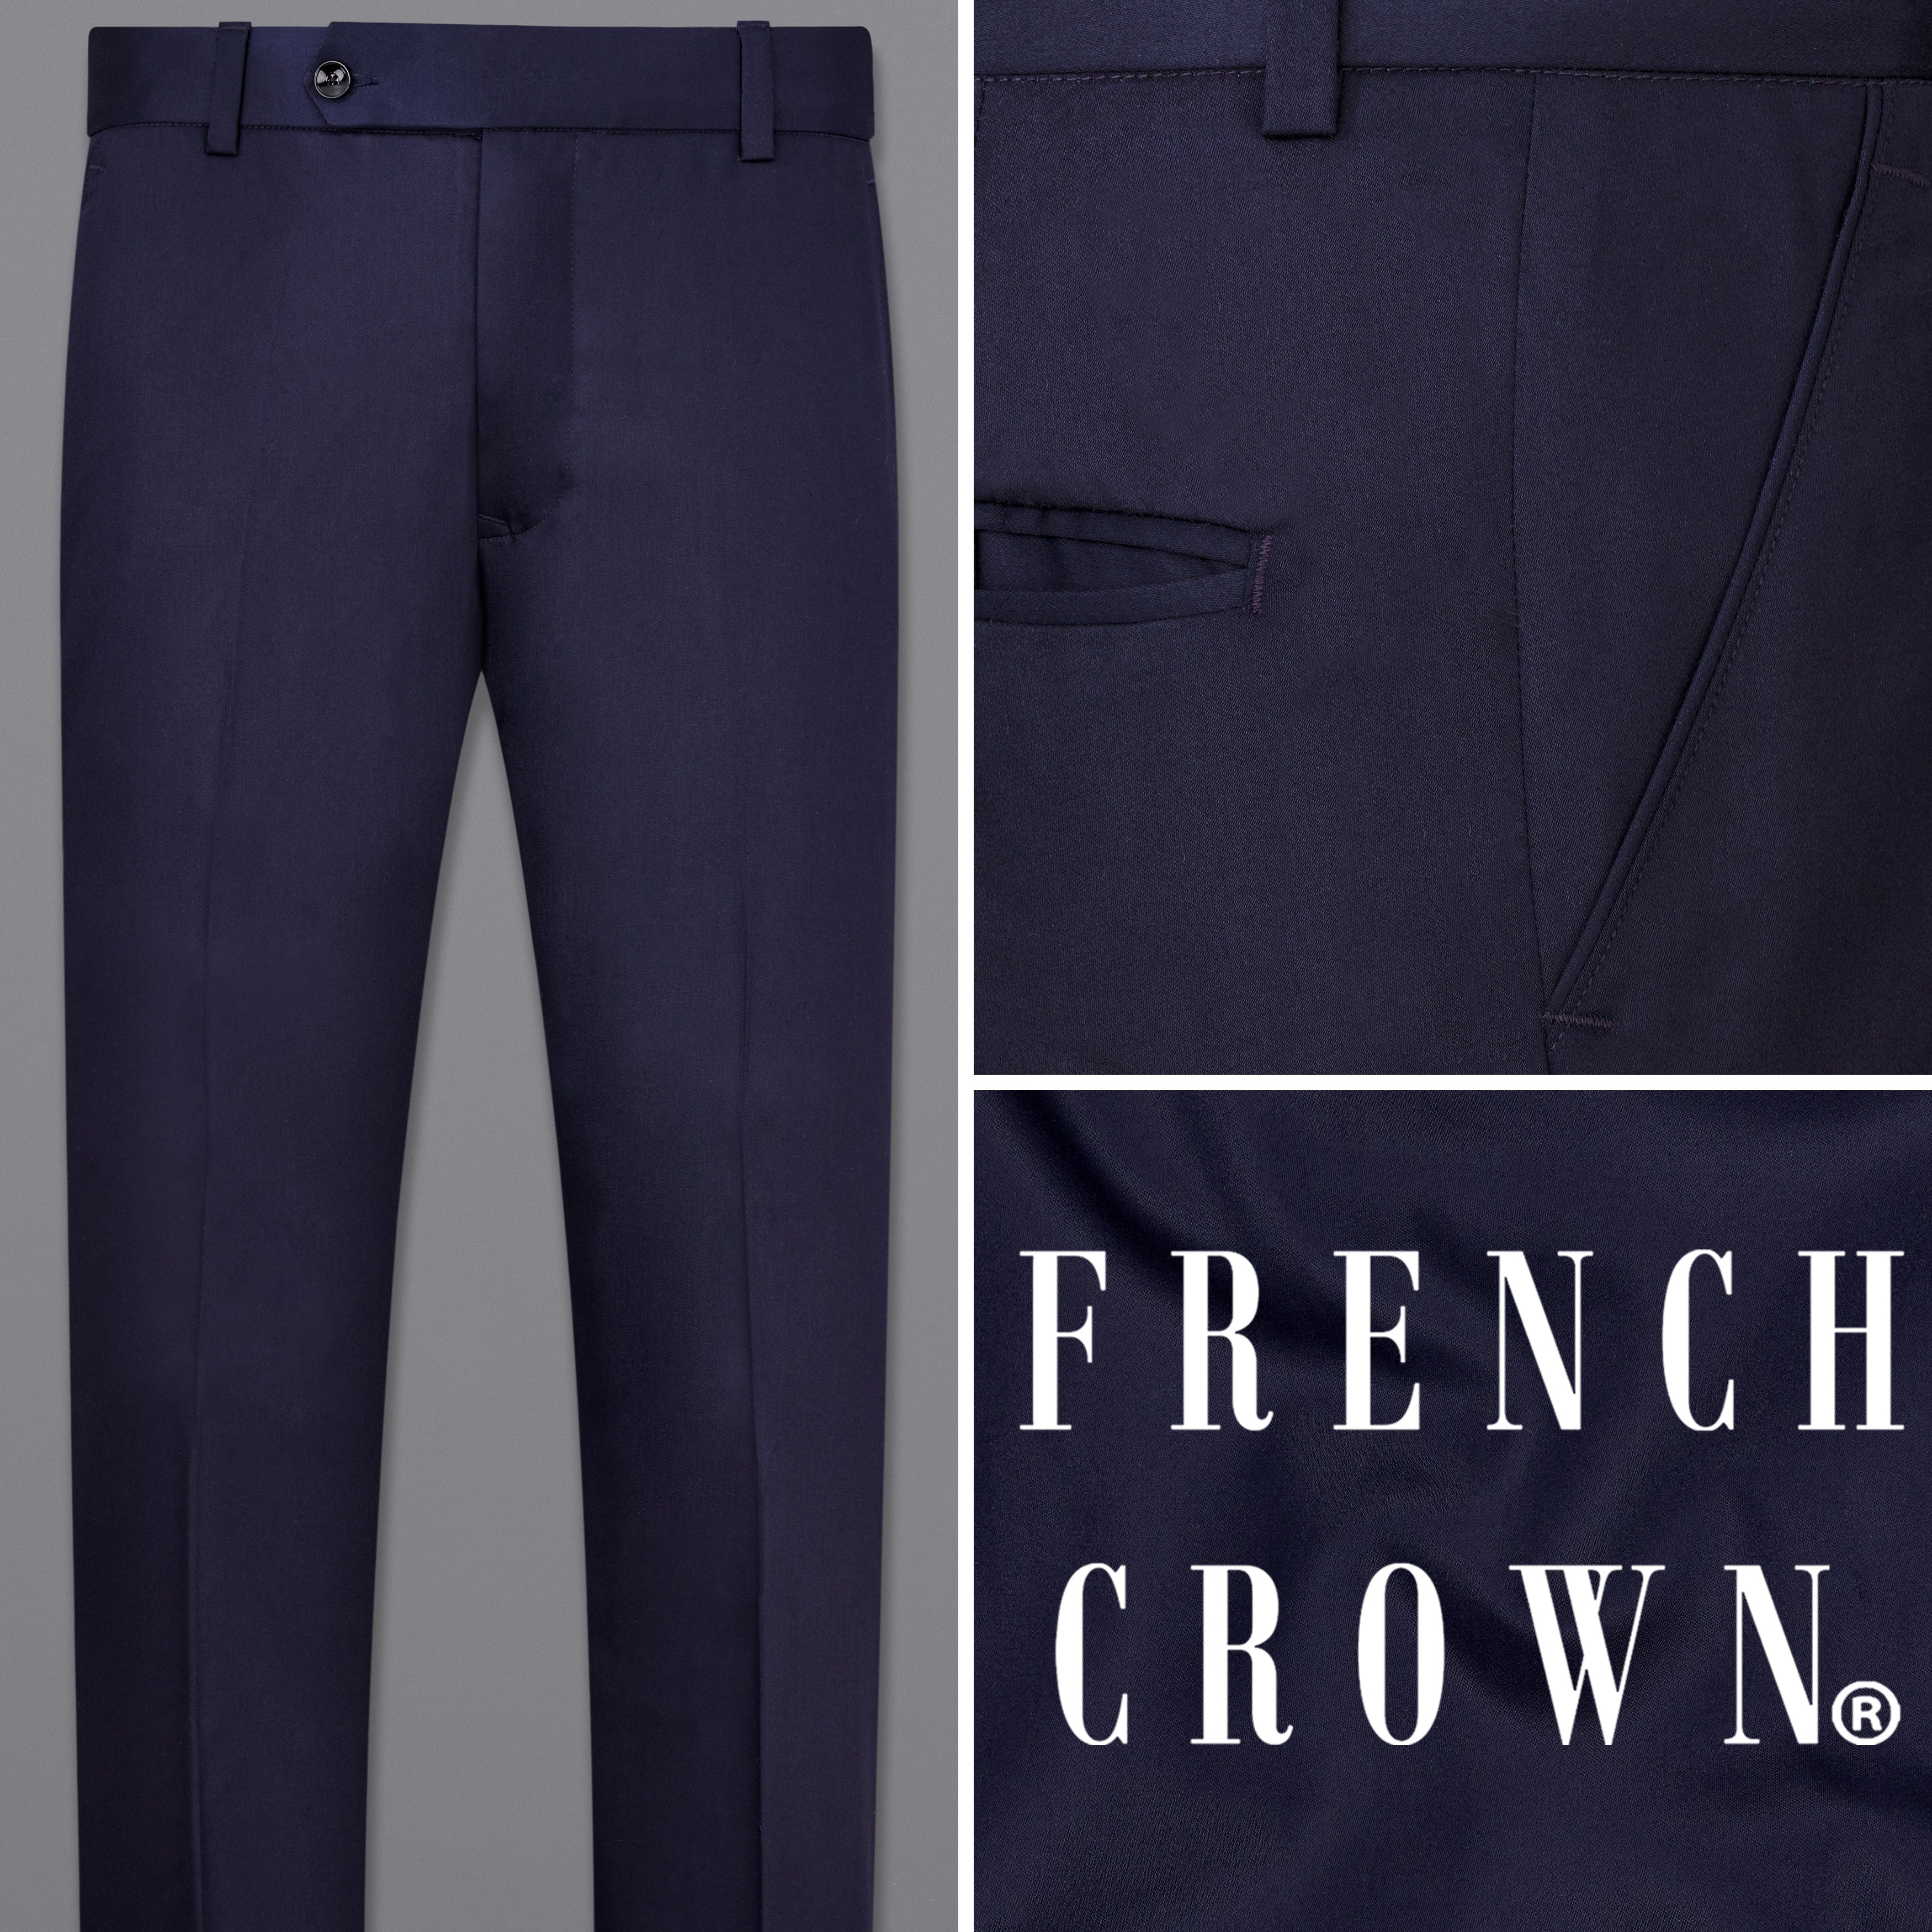 Buy FRENCH CROWN Men's Blue Pure Cotton Regular Fit Formal Trouser  (Size-34/X Large) at Amazon.in